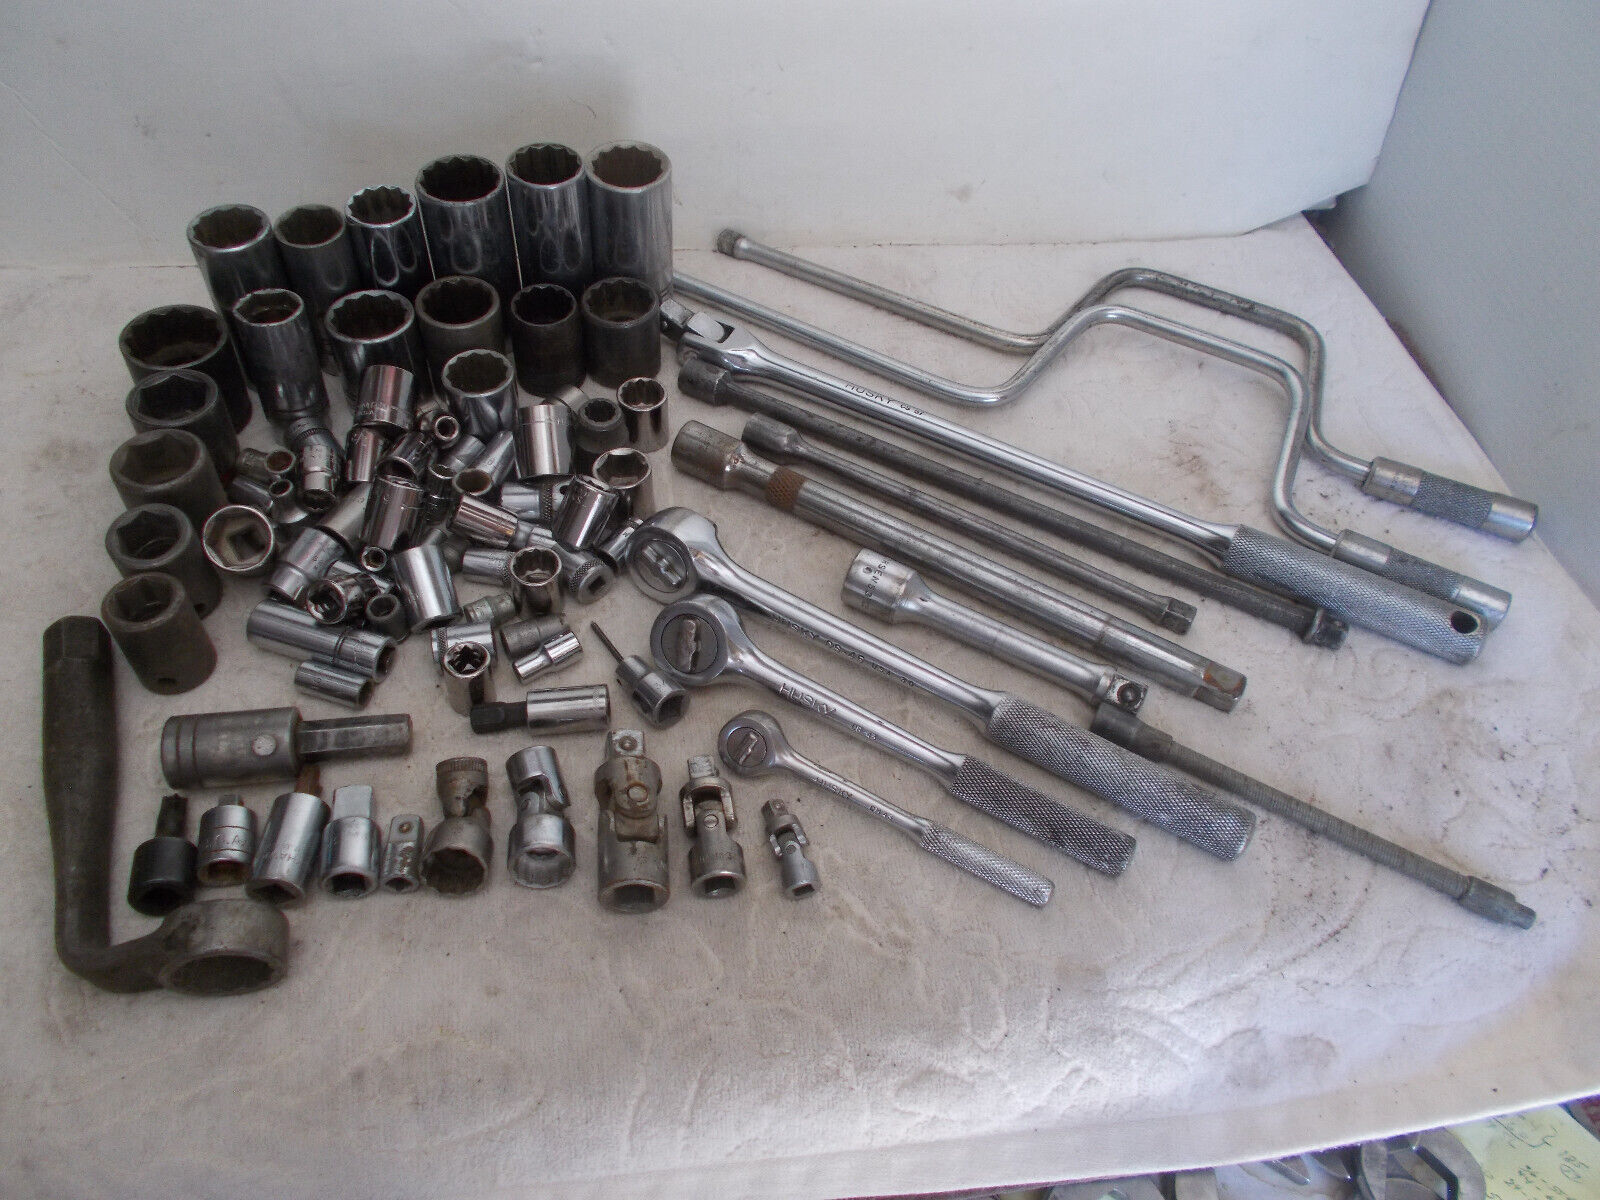 Huge Lot Of Sockets- Ratchets - Exts- Impact Sockets & More All USA 100+pc 20+lb